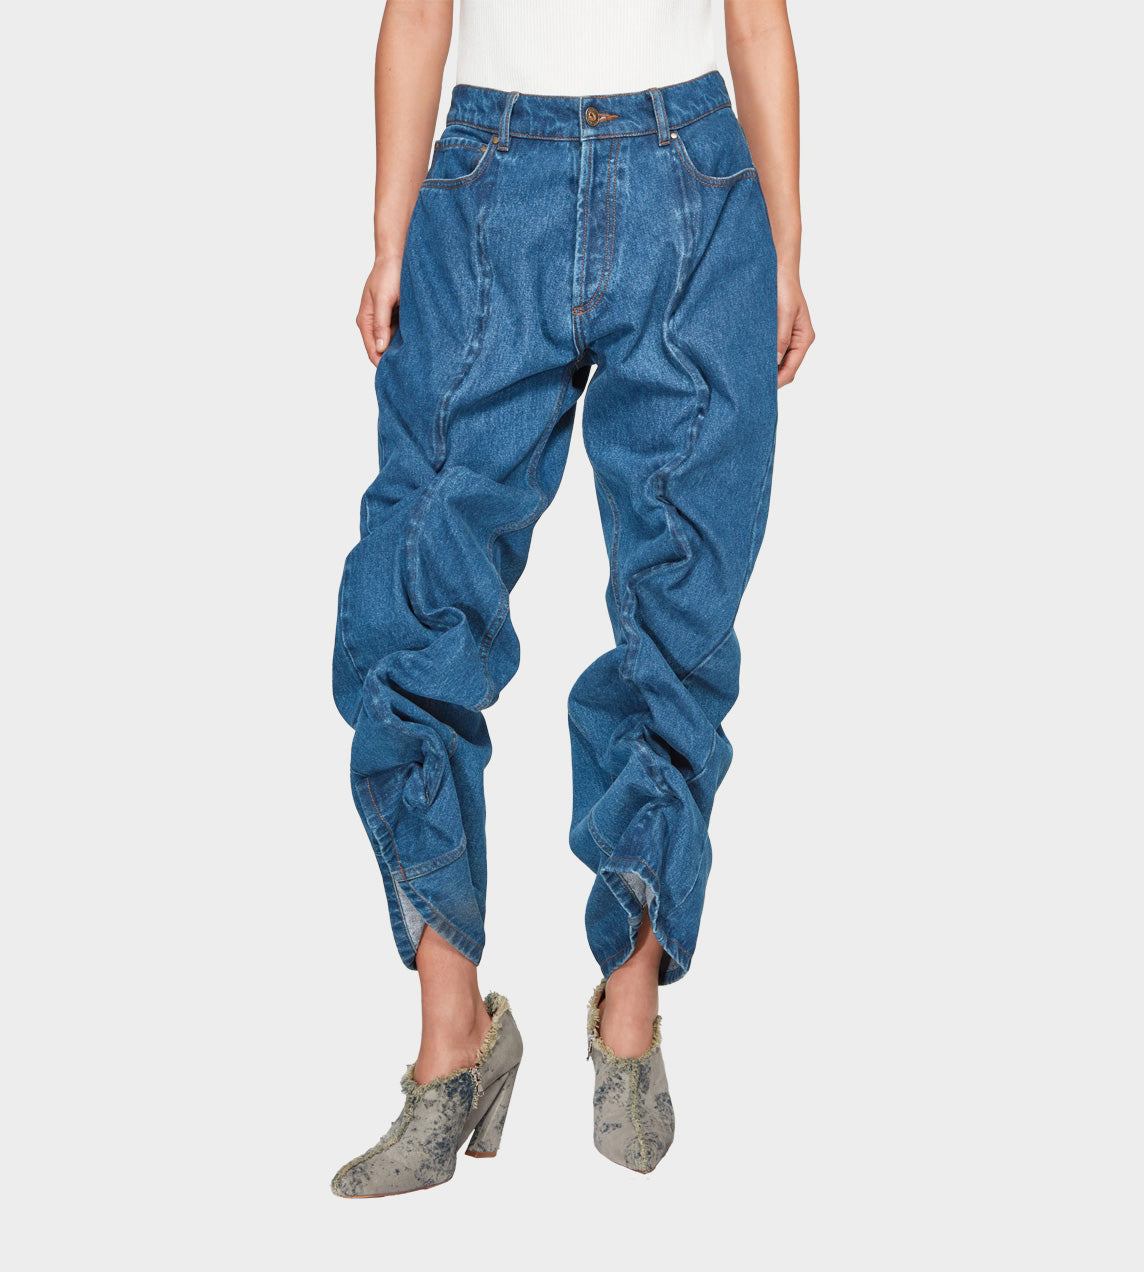 Y/Project - Classic Wire Jeans Navy